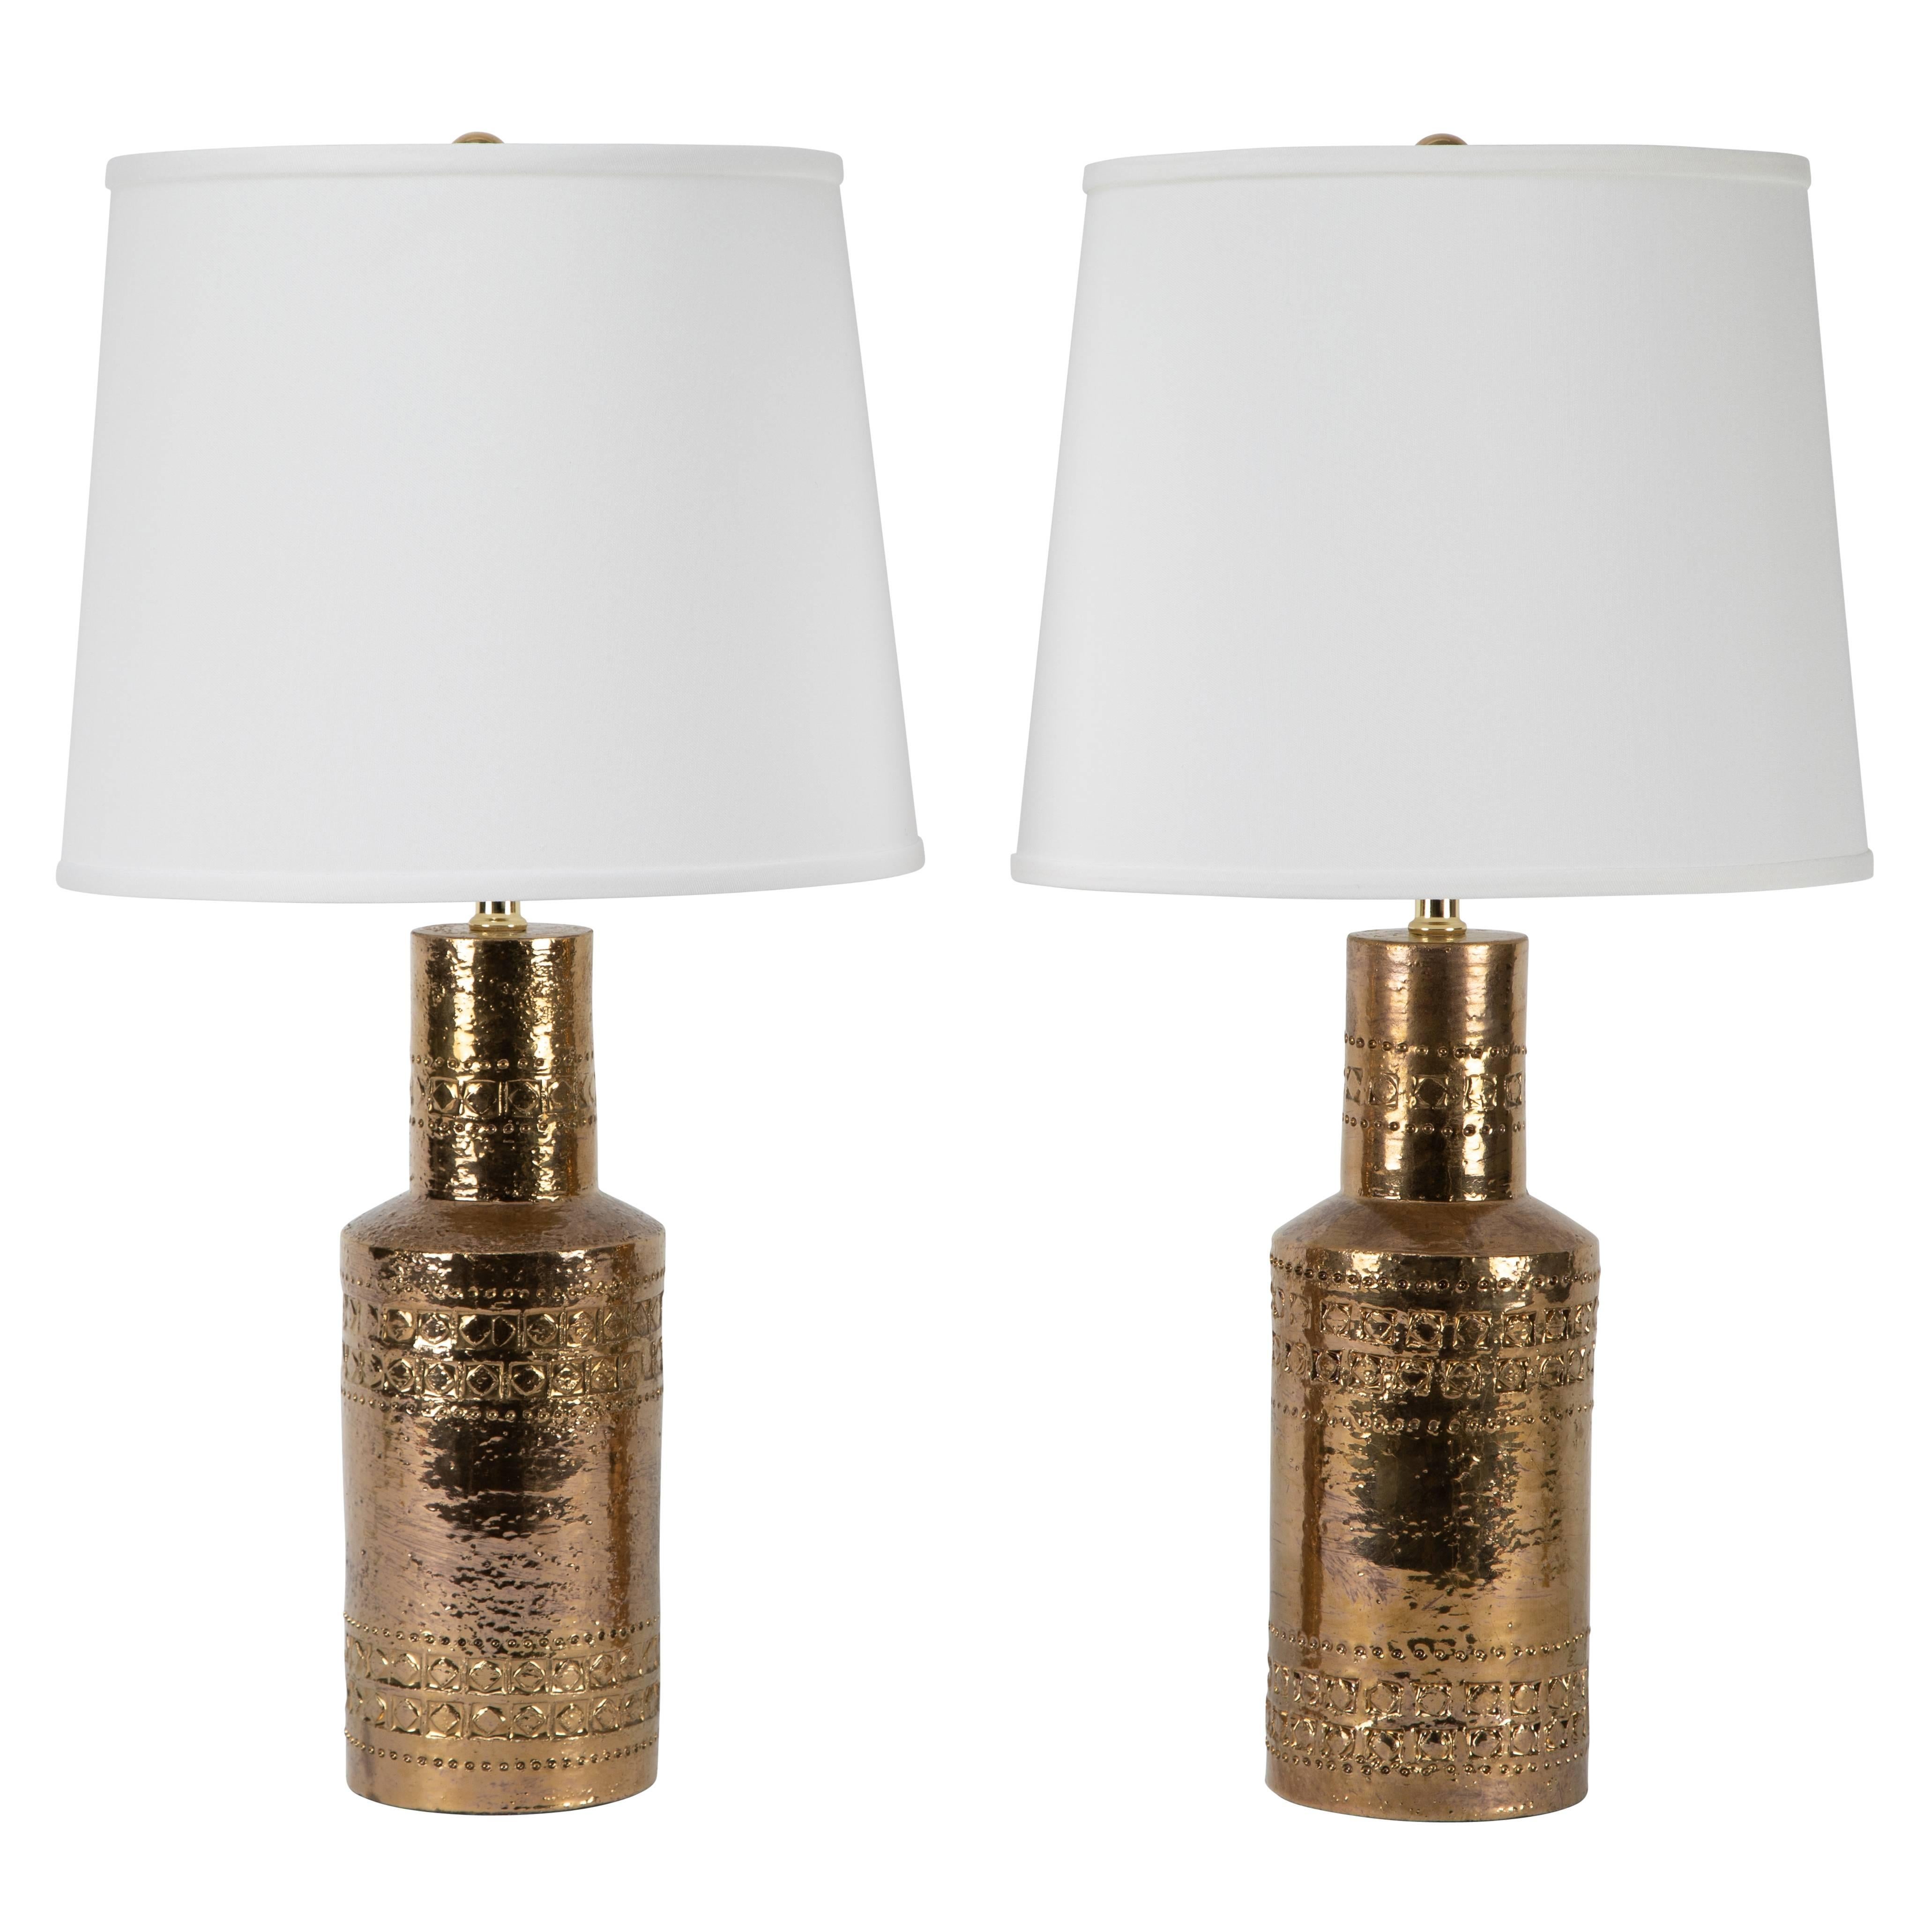 Pair of Gold Table Lamps by Aldo Londi for Bitossi, circa 1960s